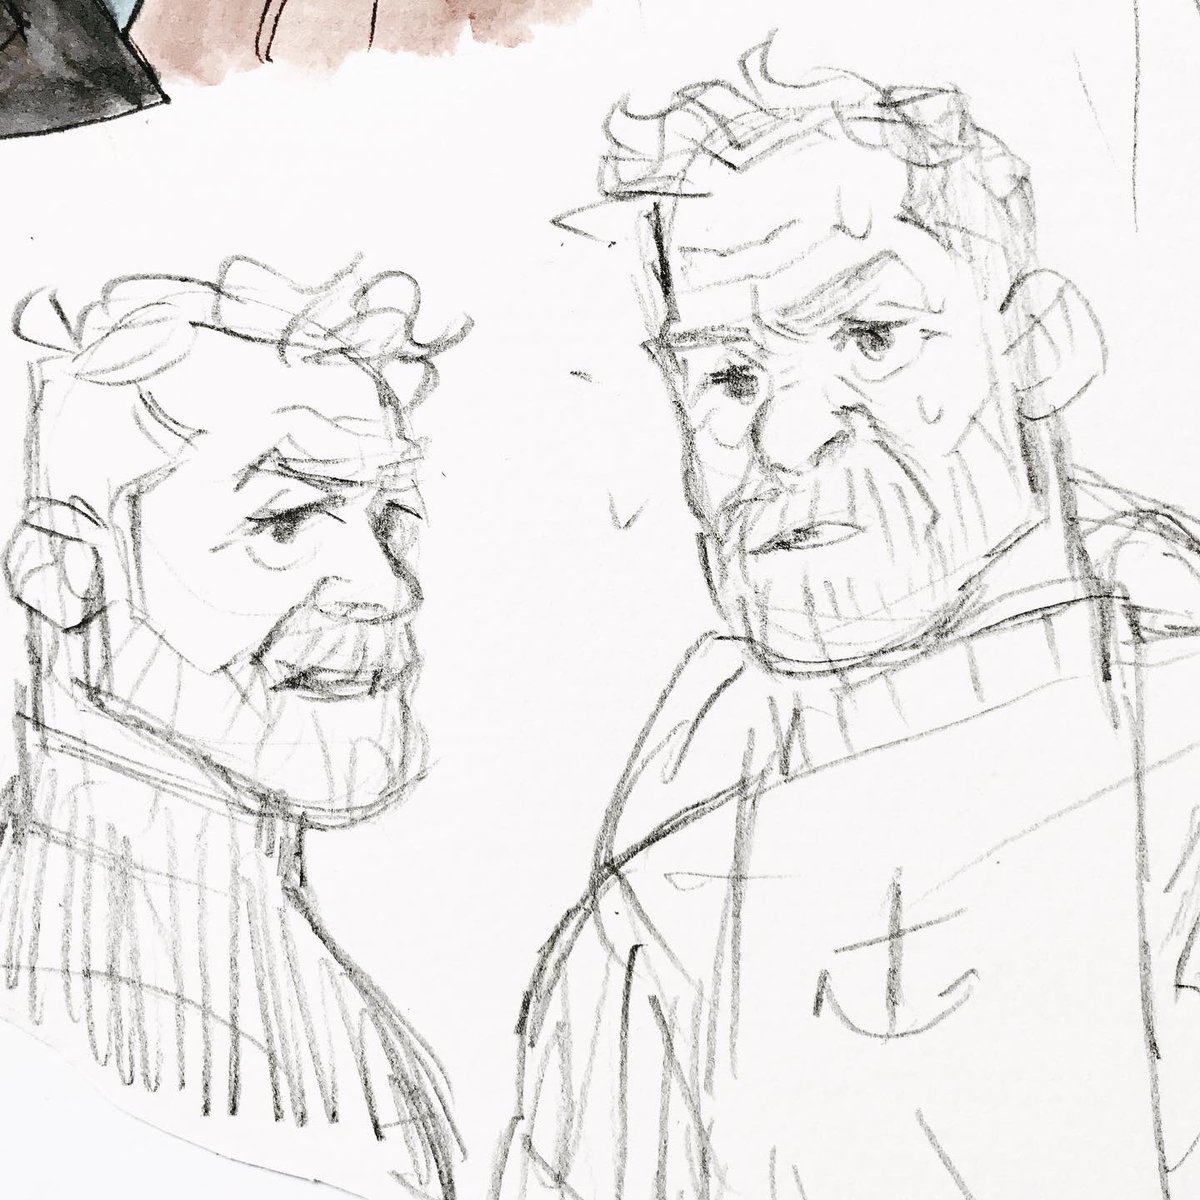 Tintin and Haddock and also Andy Serkis Haddock cause i am forever salty about that 2011 movie NOT BEING LIVE-ACTION. I wanted Jamie Tin :`((((( #dozerdraws 